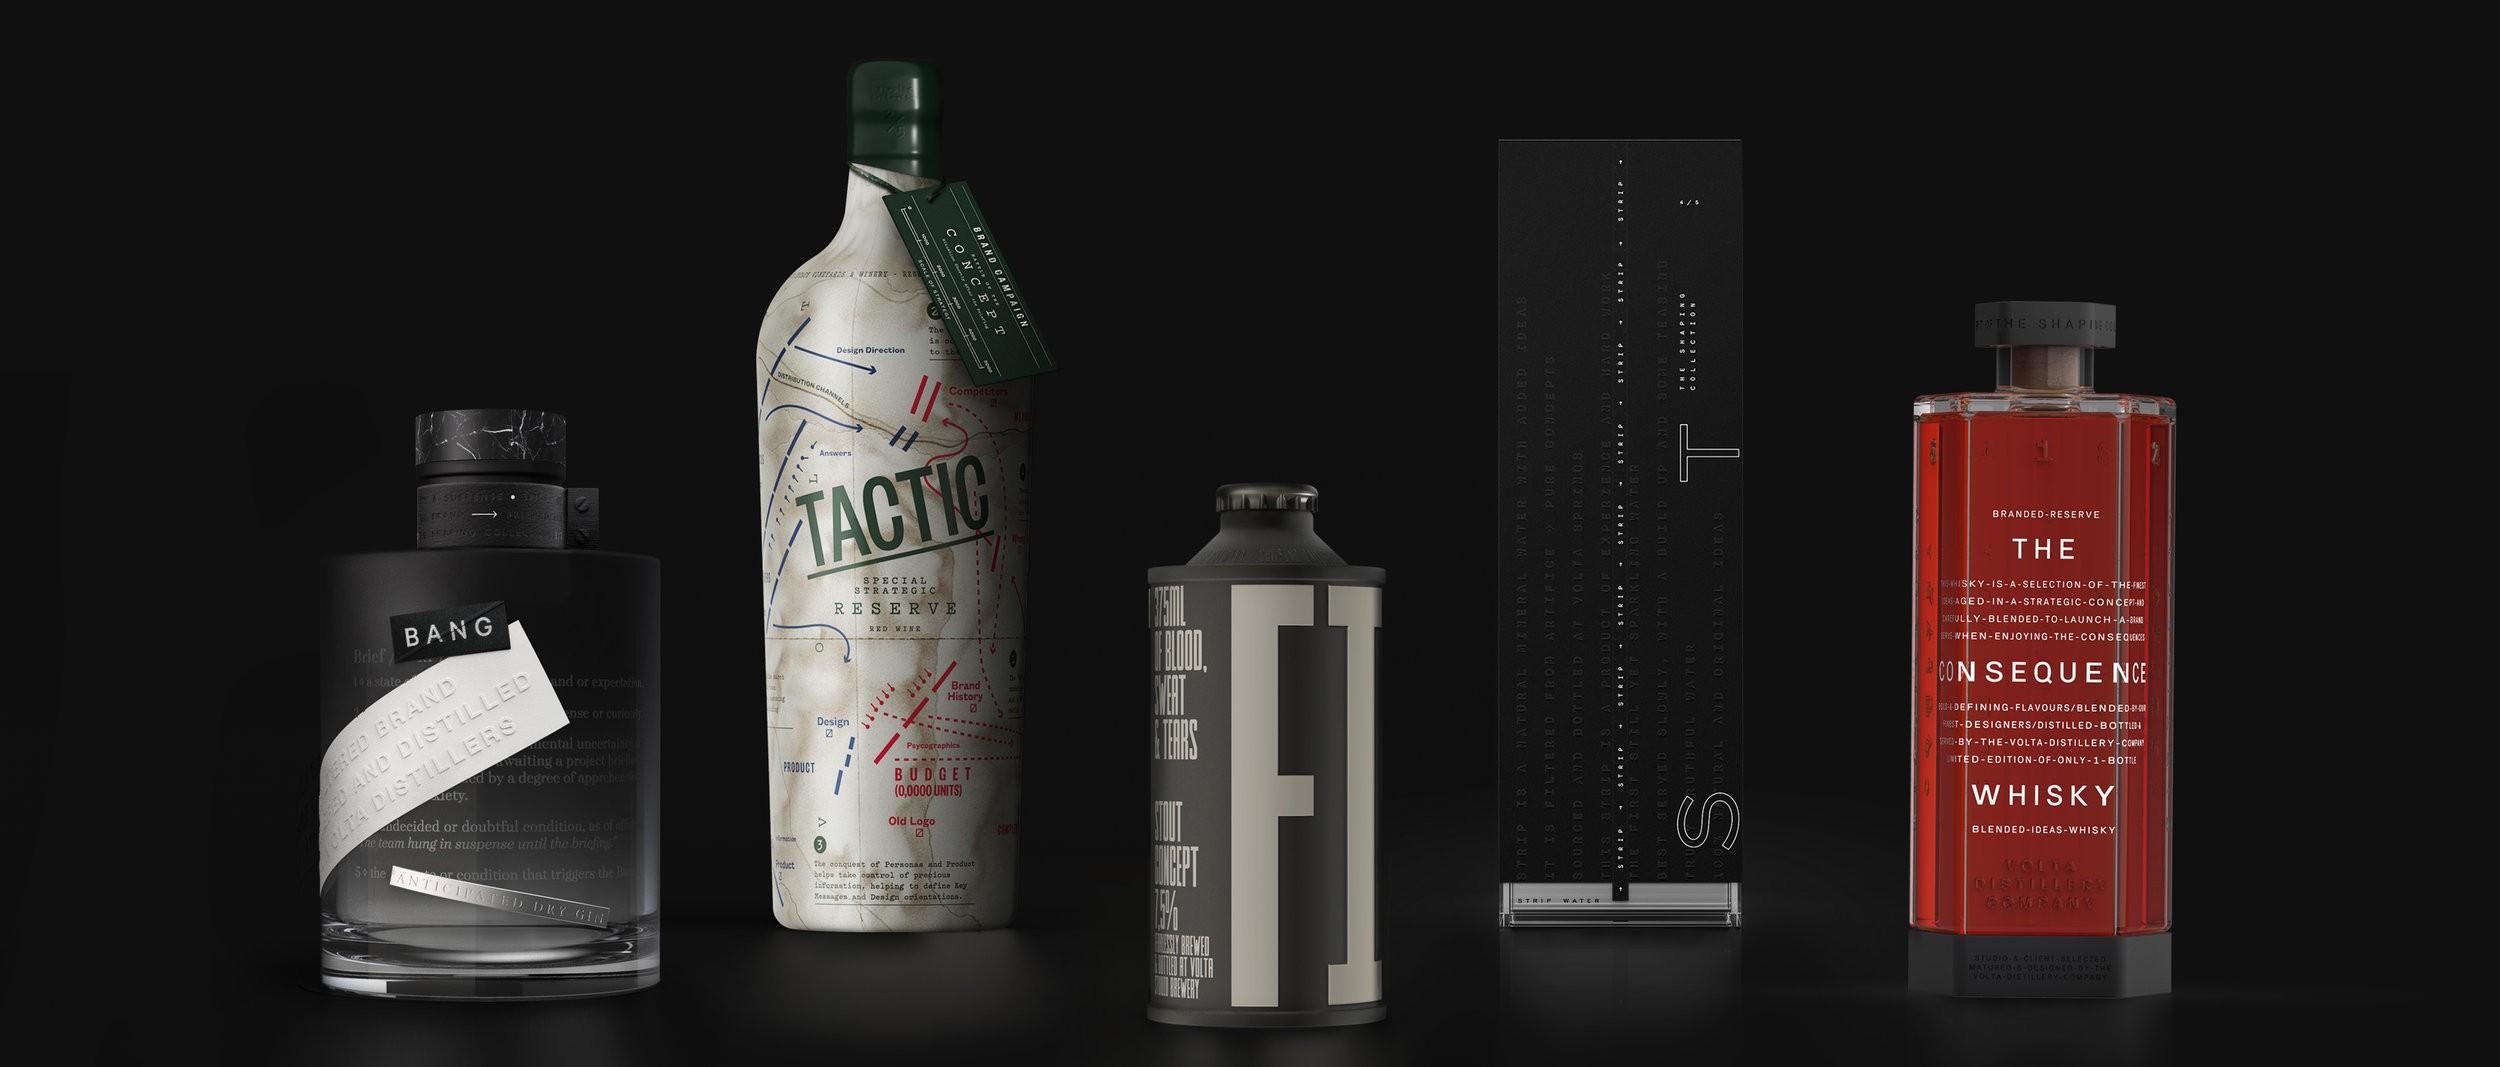 A Collection of Packaging Design Concepts to Express Agencies Approach